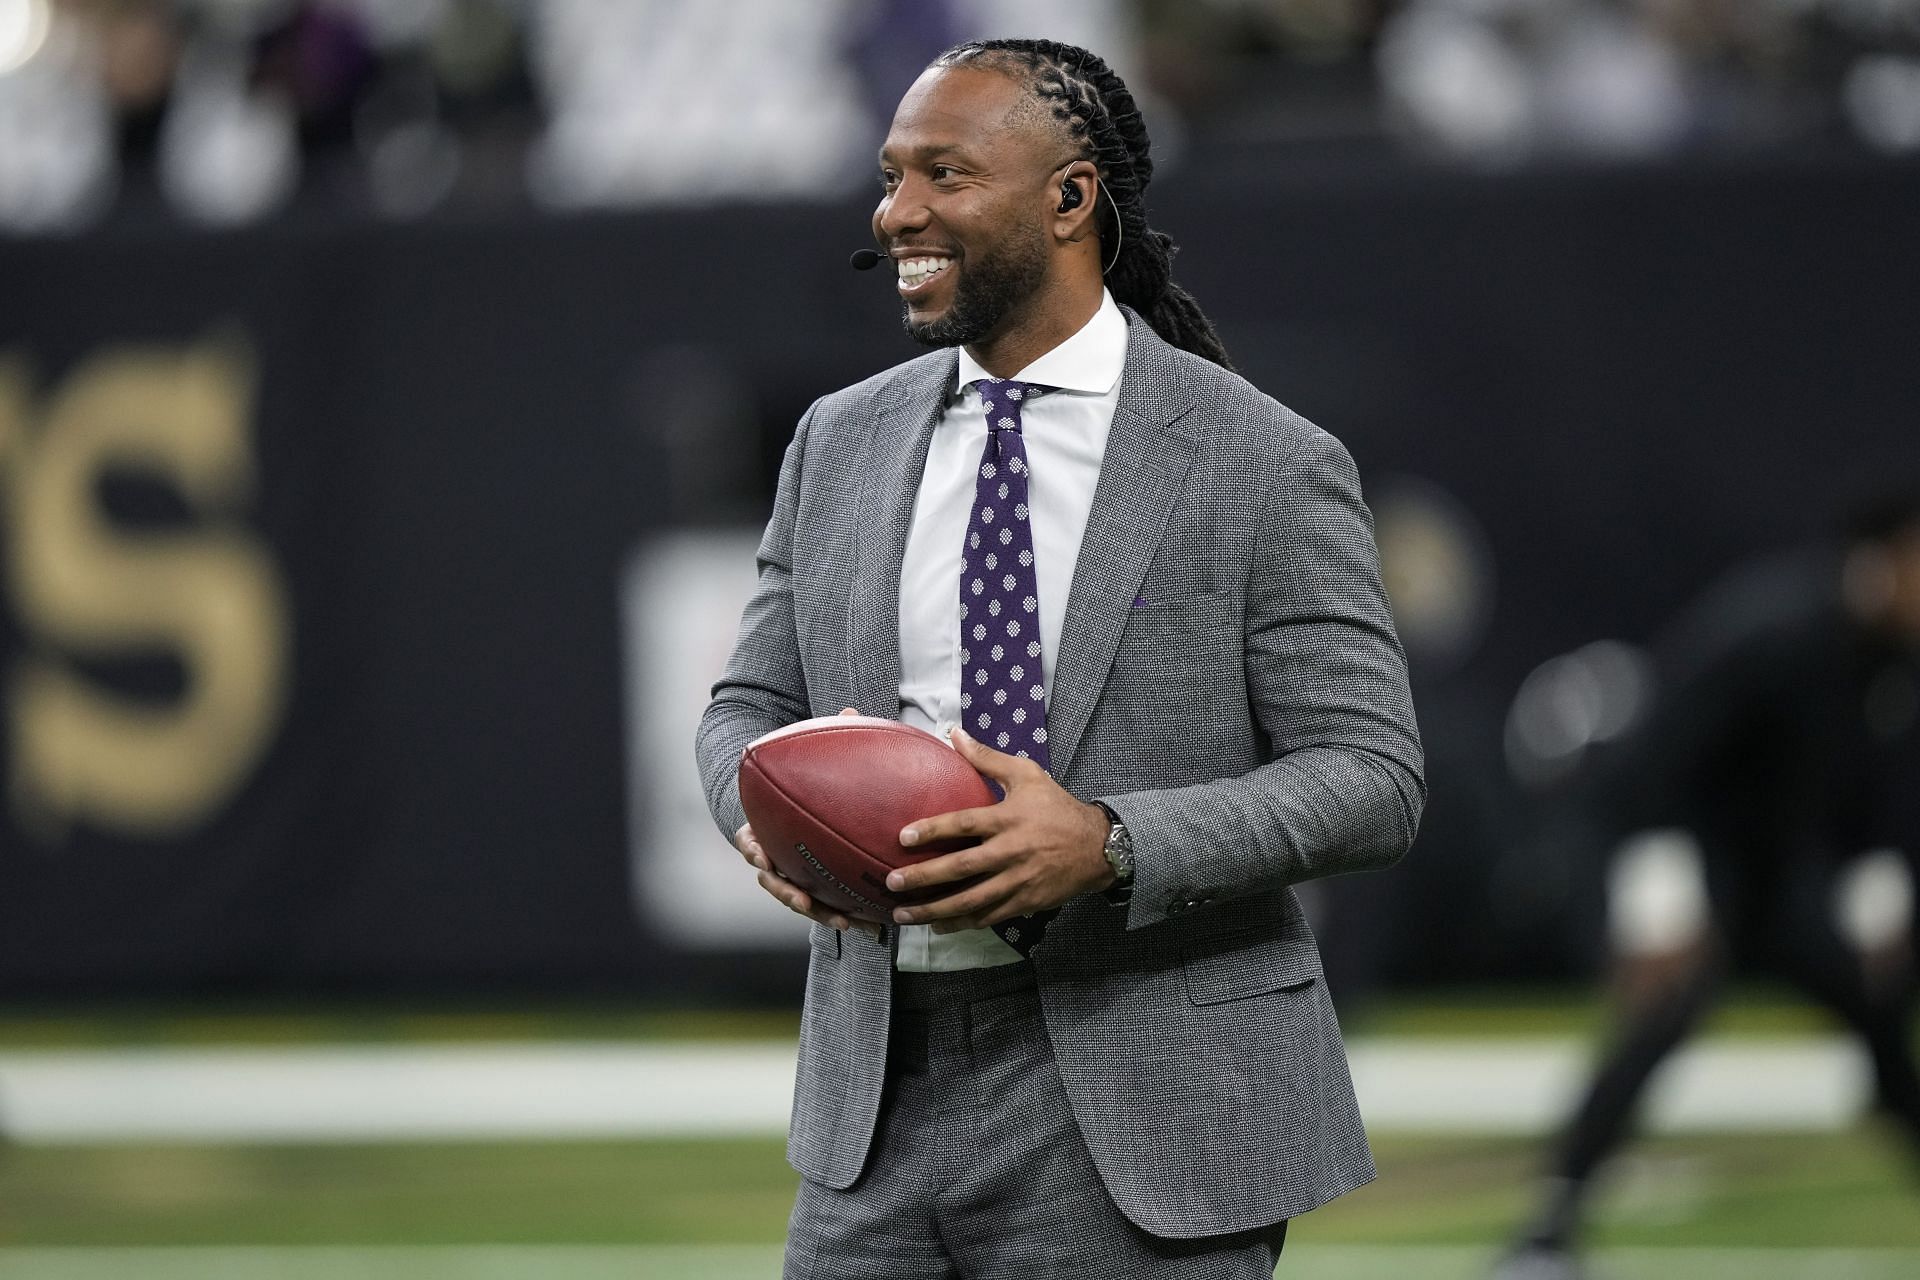 Larry Fitzgerald Jr. holds a ball on the field before an NFL football game between the New Orleans Saints and the Baltimore Ravens in New Orleans on November 7, 2022